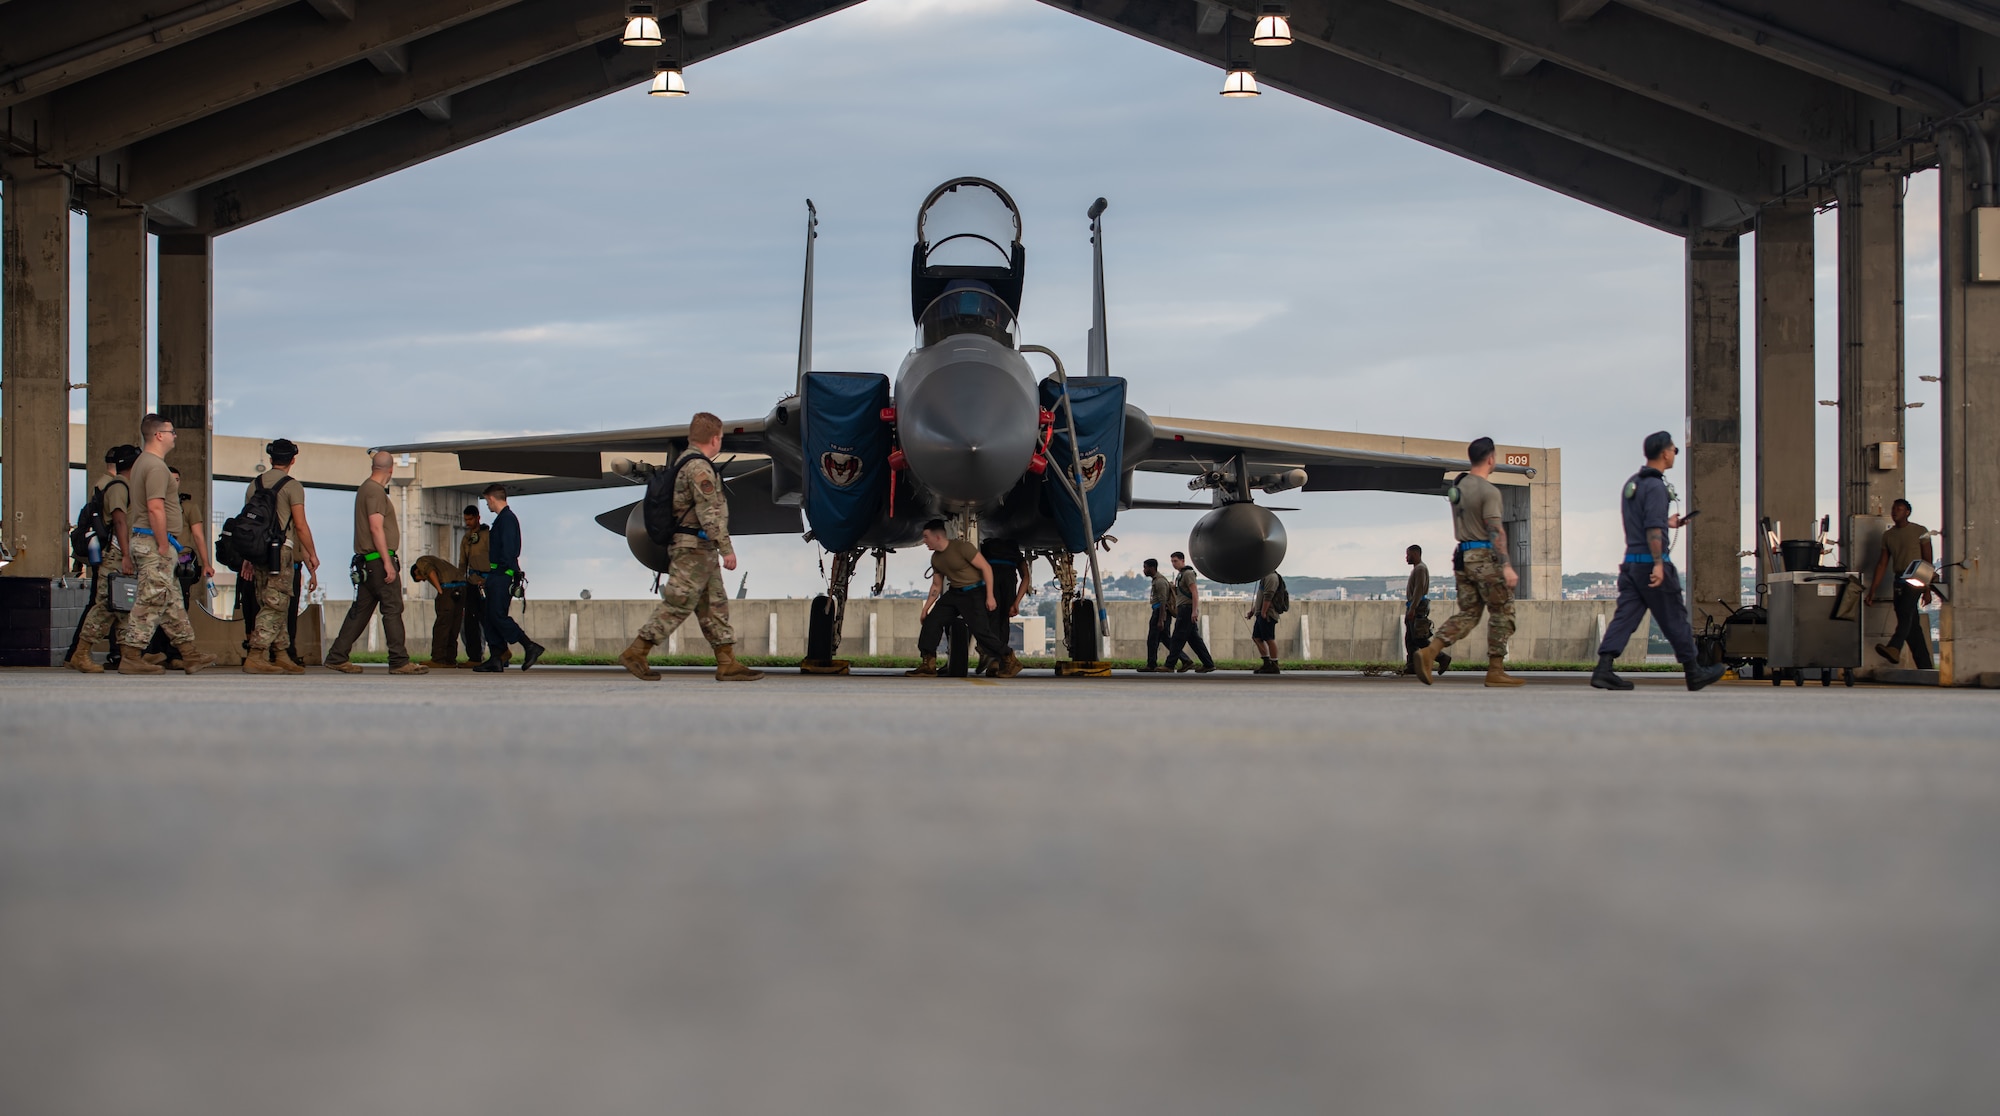 Several Airmen walk around, in front and behind an F-15 Eagle.